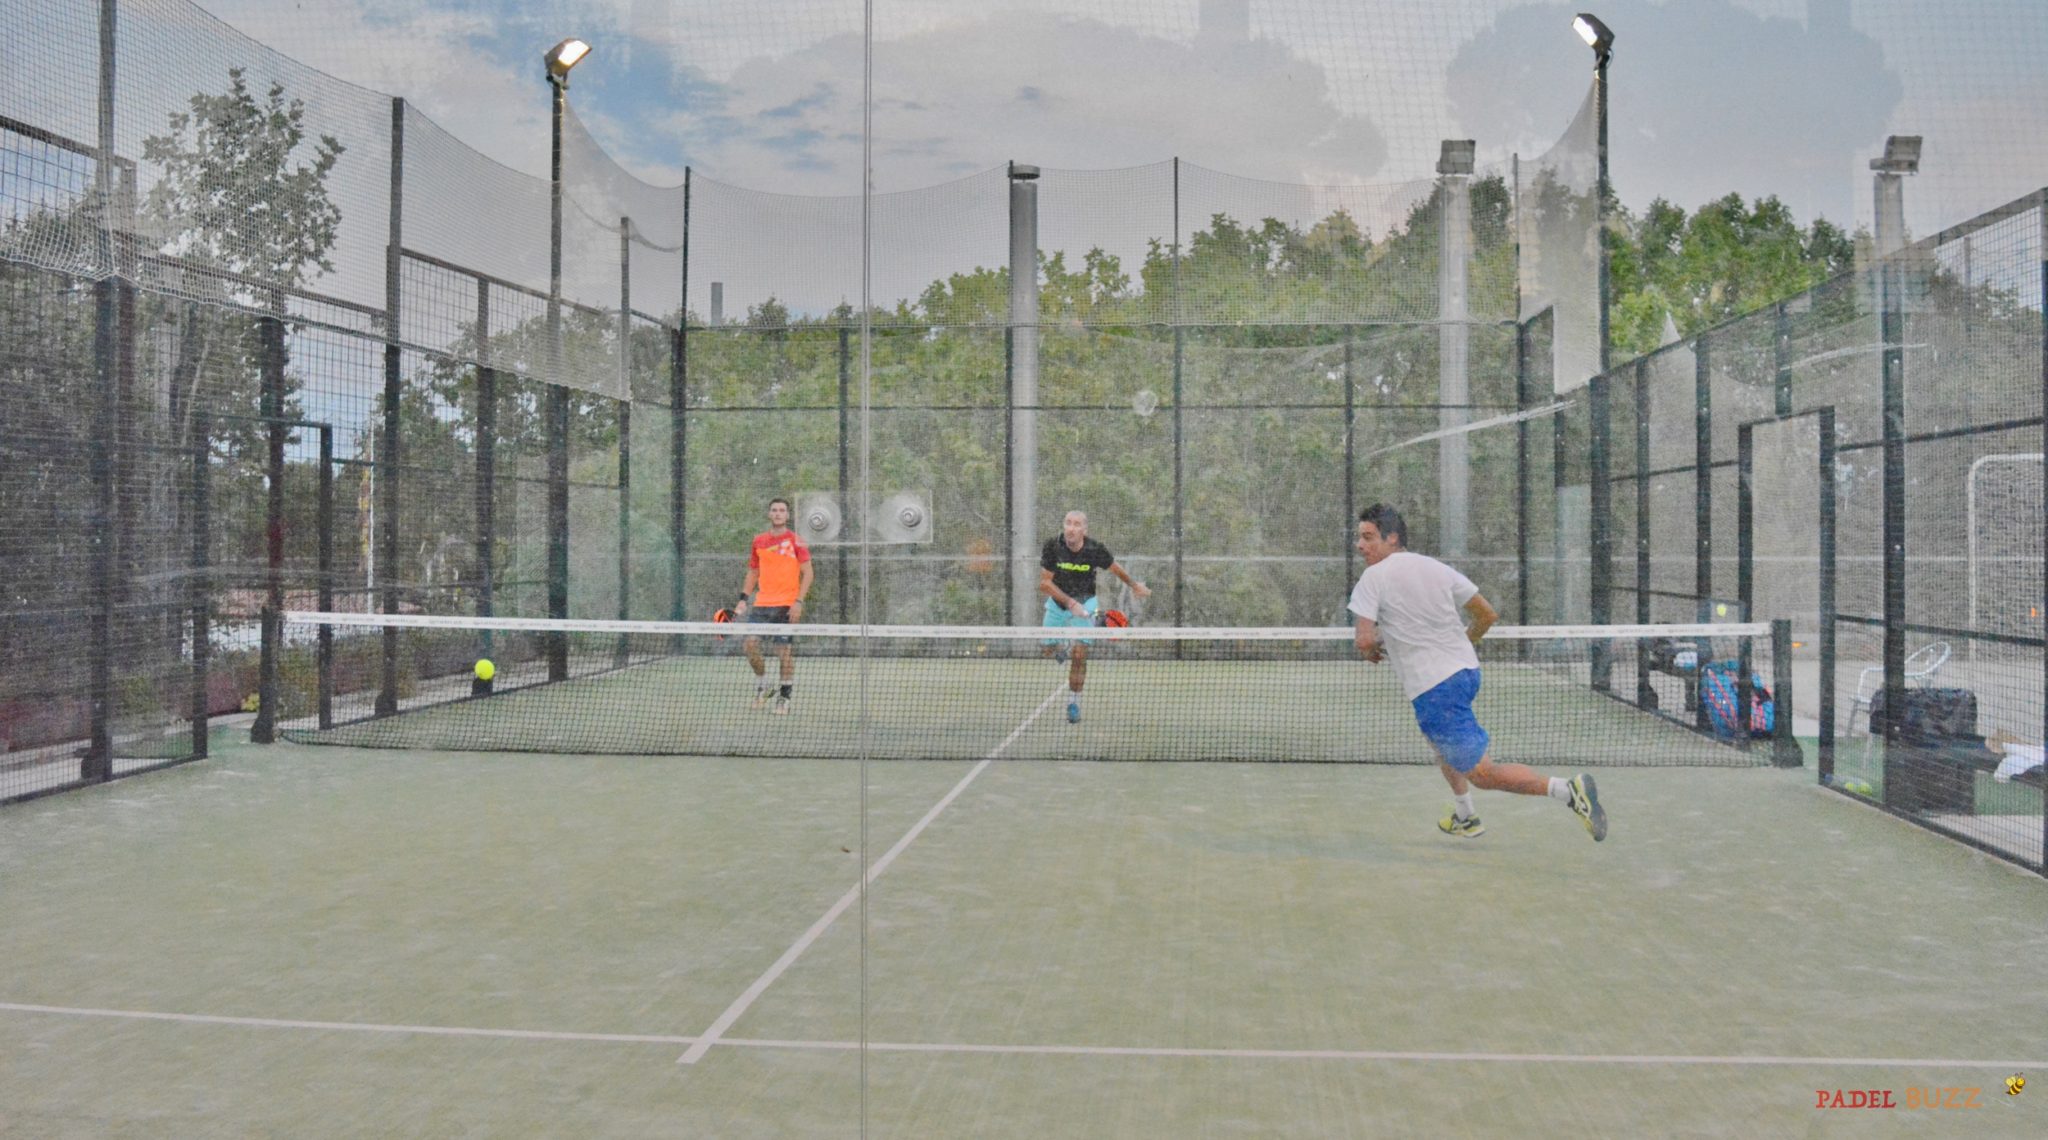 In Spain the padel resumes at full speed